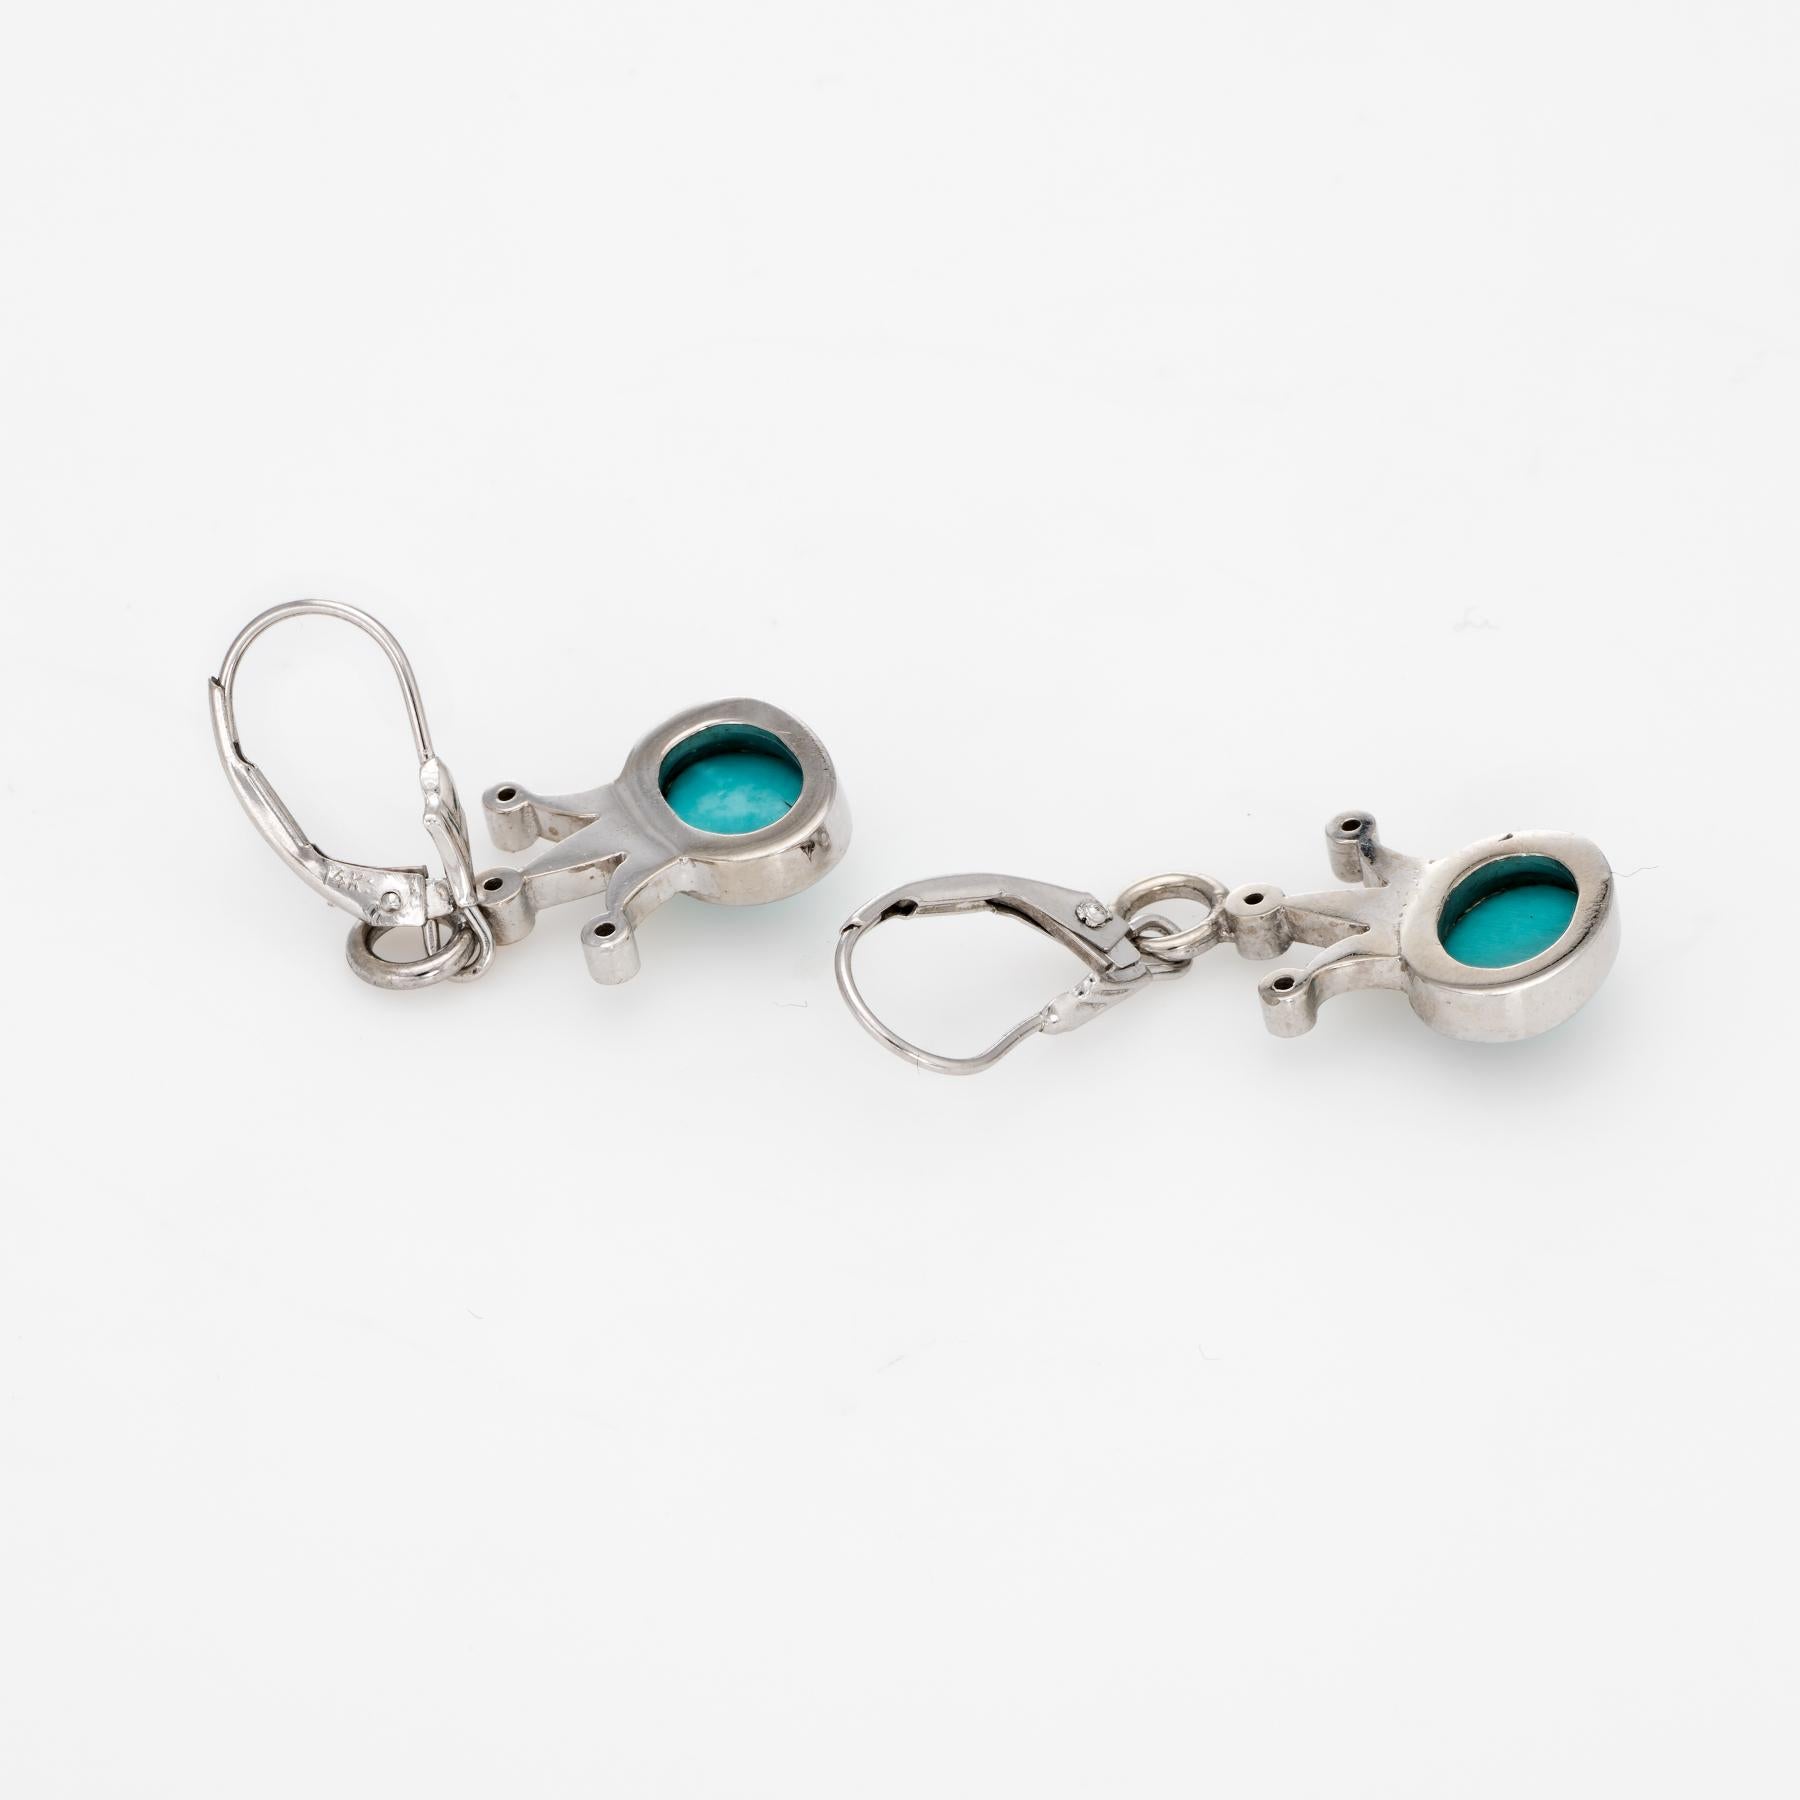 Elegant pair of vintage turquoise & diamond crown earrings, crafted in 14k white gold. 

Cabochon cut turquoise measures 7.5mm x 6mm (each), accented with an estimated 0.10 carats of diamonds (estimated at H-I color and SI2-I1 clarity). The